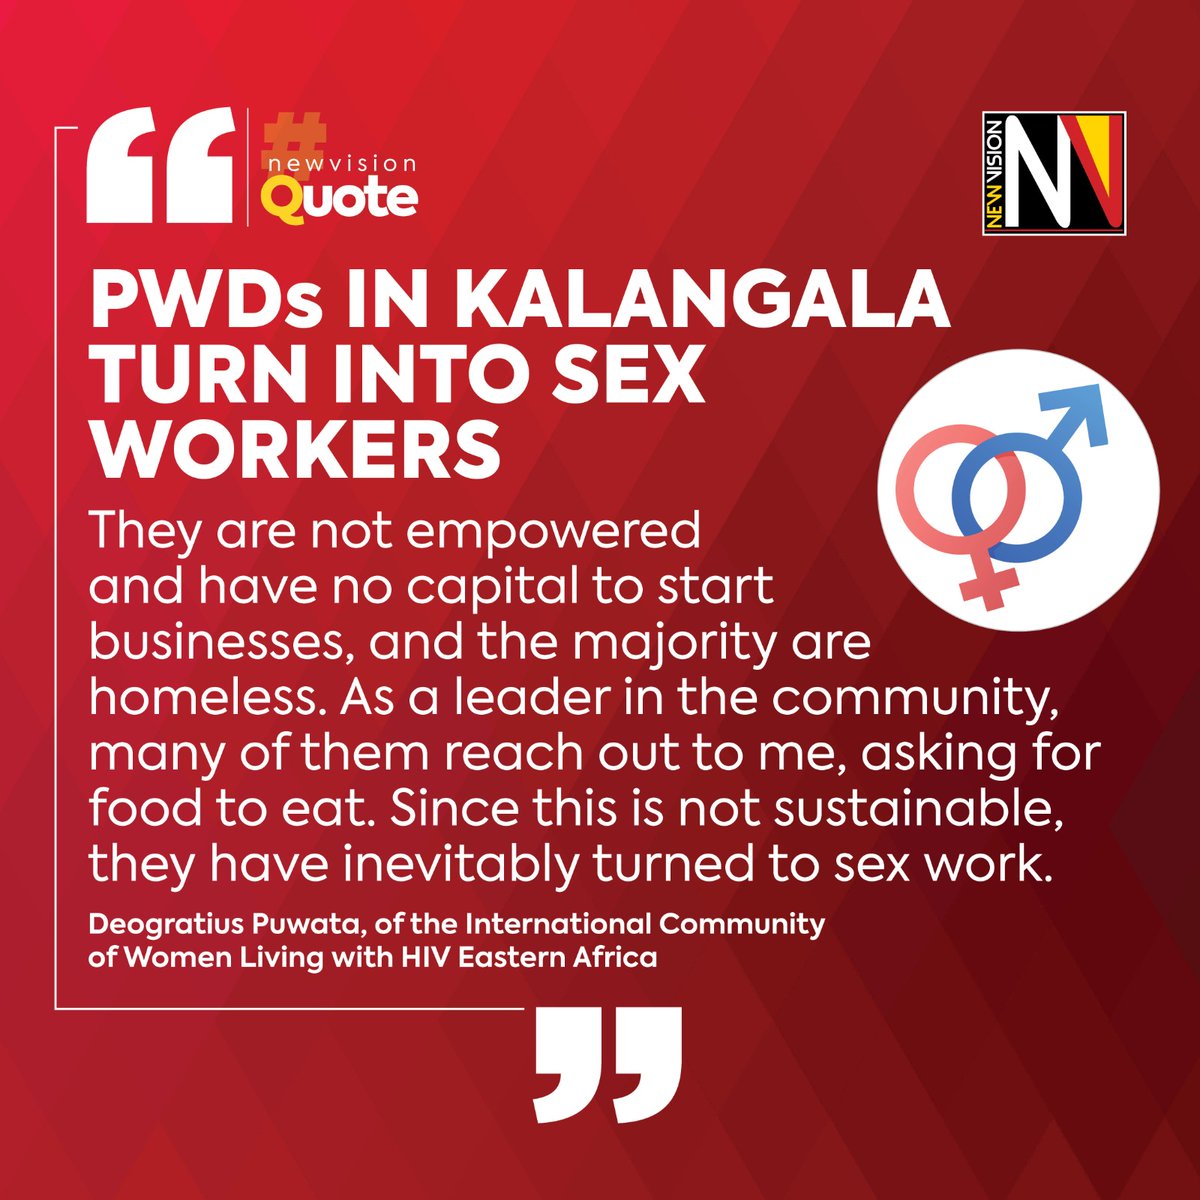 Persons with disabilities (PWDs) have turned into sex workers. They are not empowered and have no capital to start businesses, and the majority are homeless.

Read more in our #EPAPER 🗞️👉🏿 bit.ly/3d3acBF
#VisionUpdates